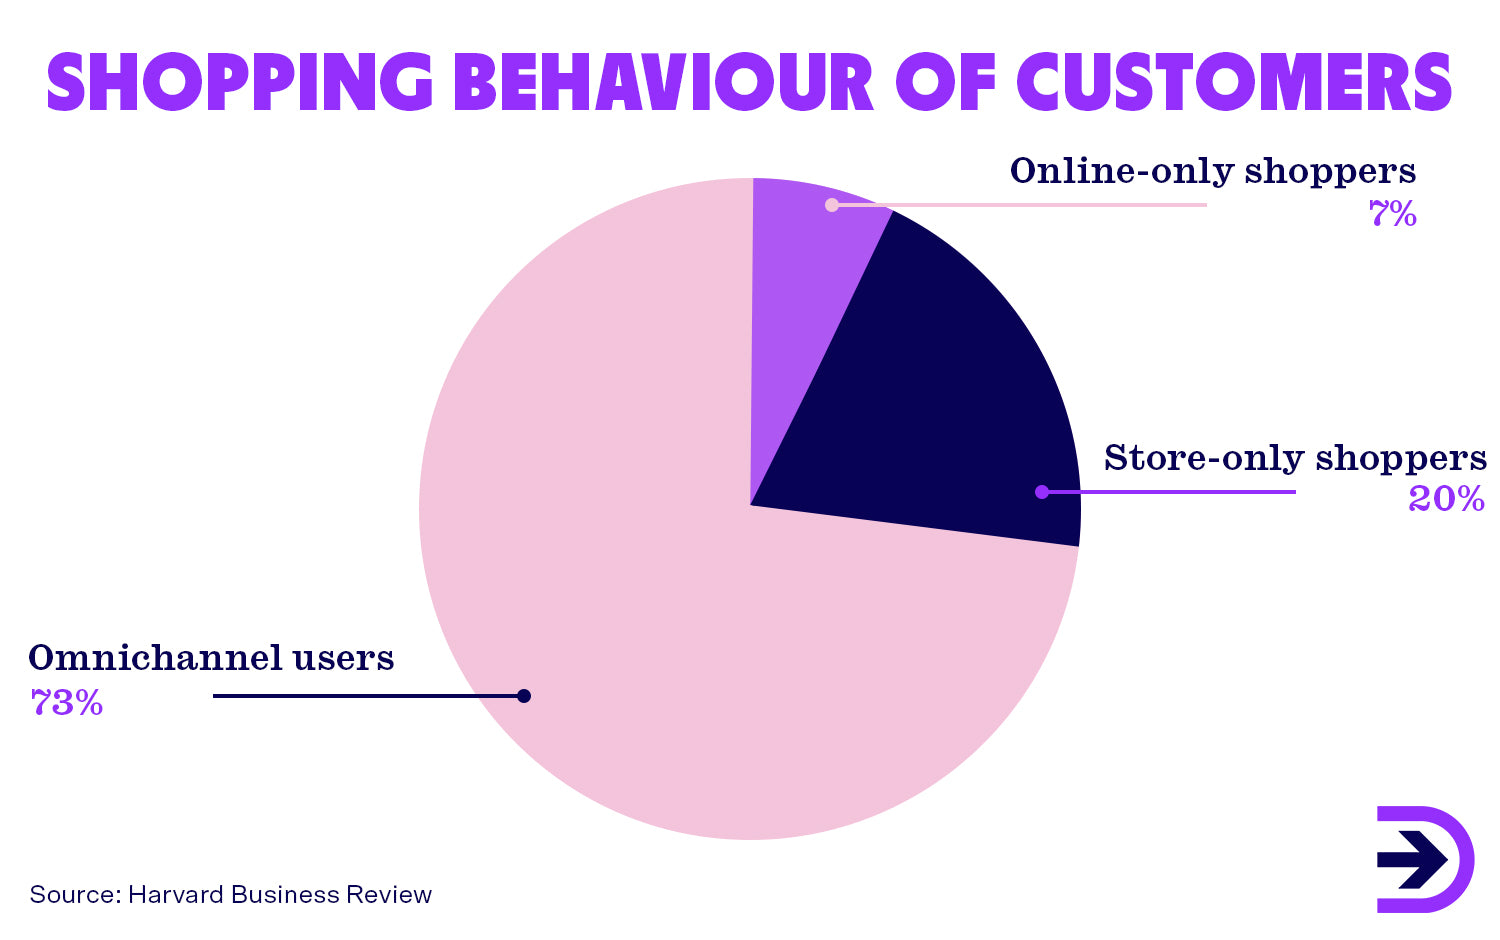 A pie chart showing the the shopping behaviours of customers. 73% of users use omnichannel.